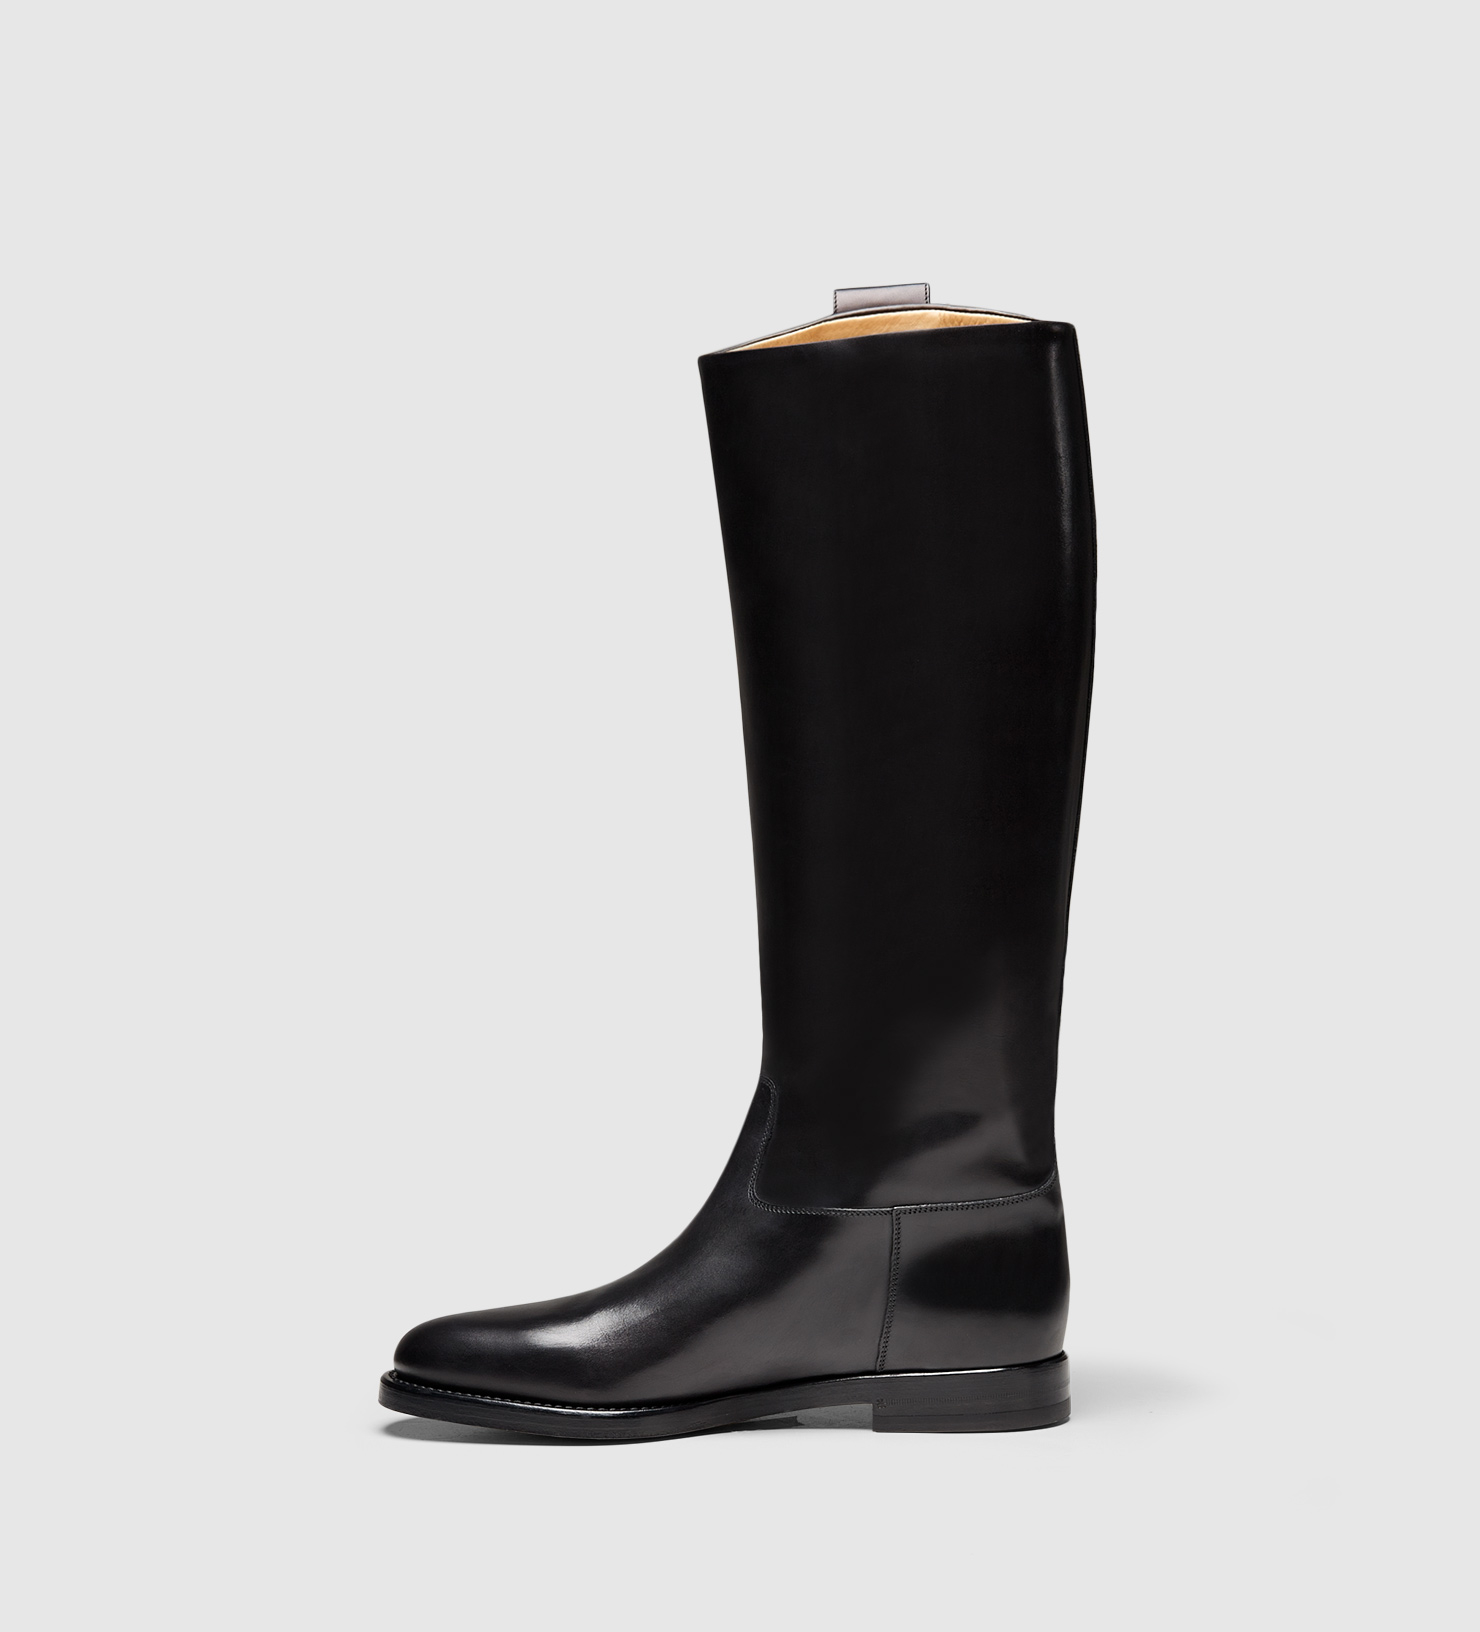 Gucci Men's Leather Riding Boot From 